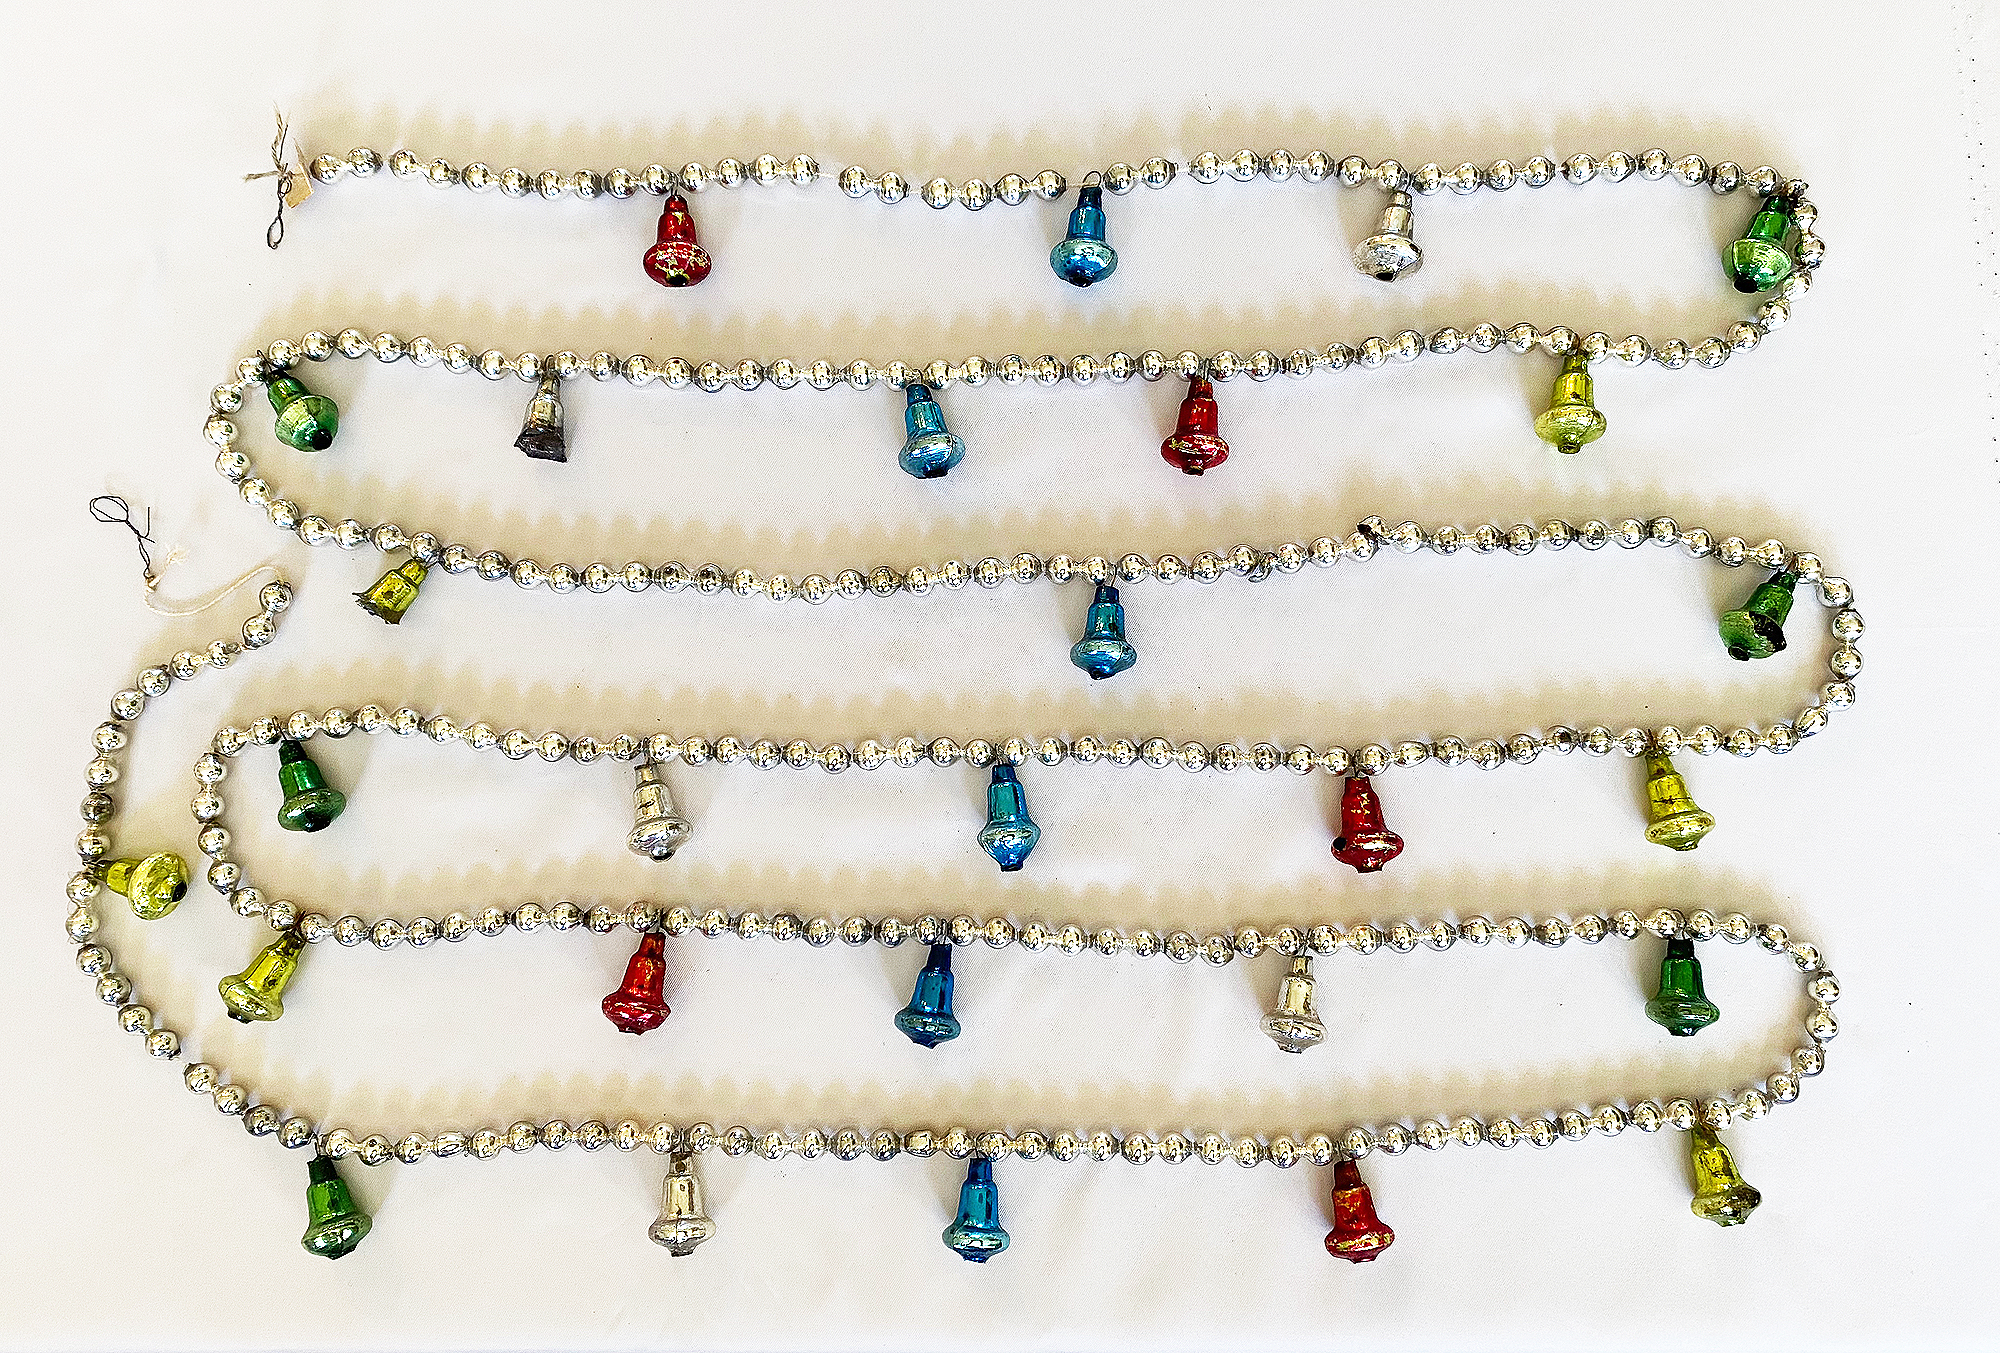 Deluxe Vintage Multicolored Glass Bead Garland Accented with